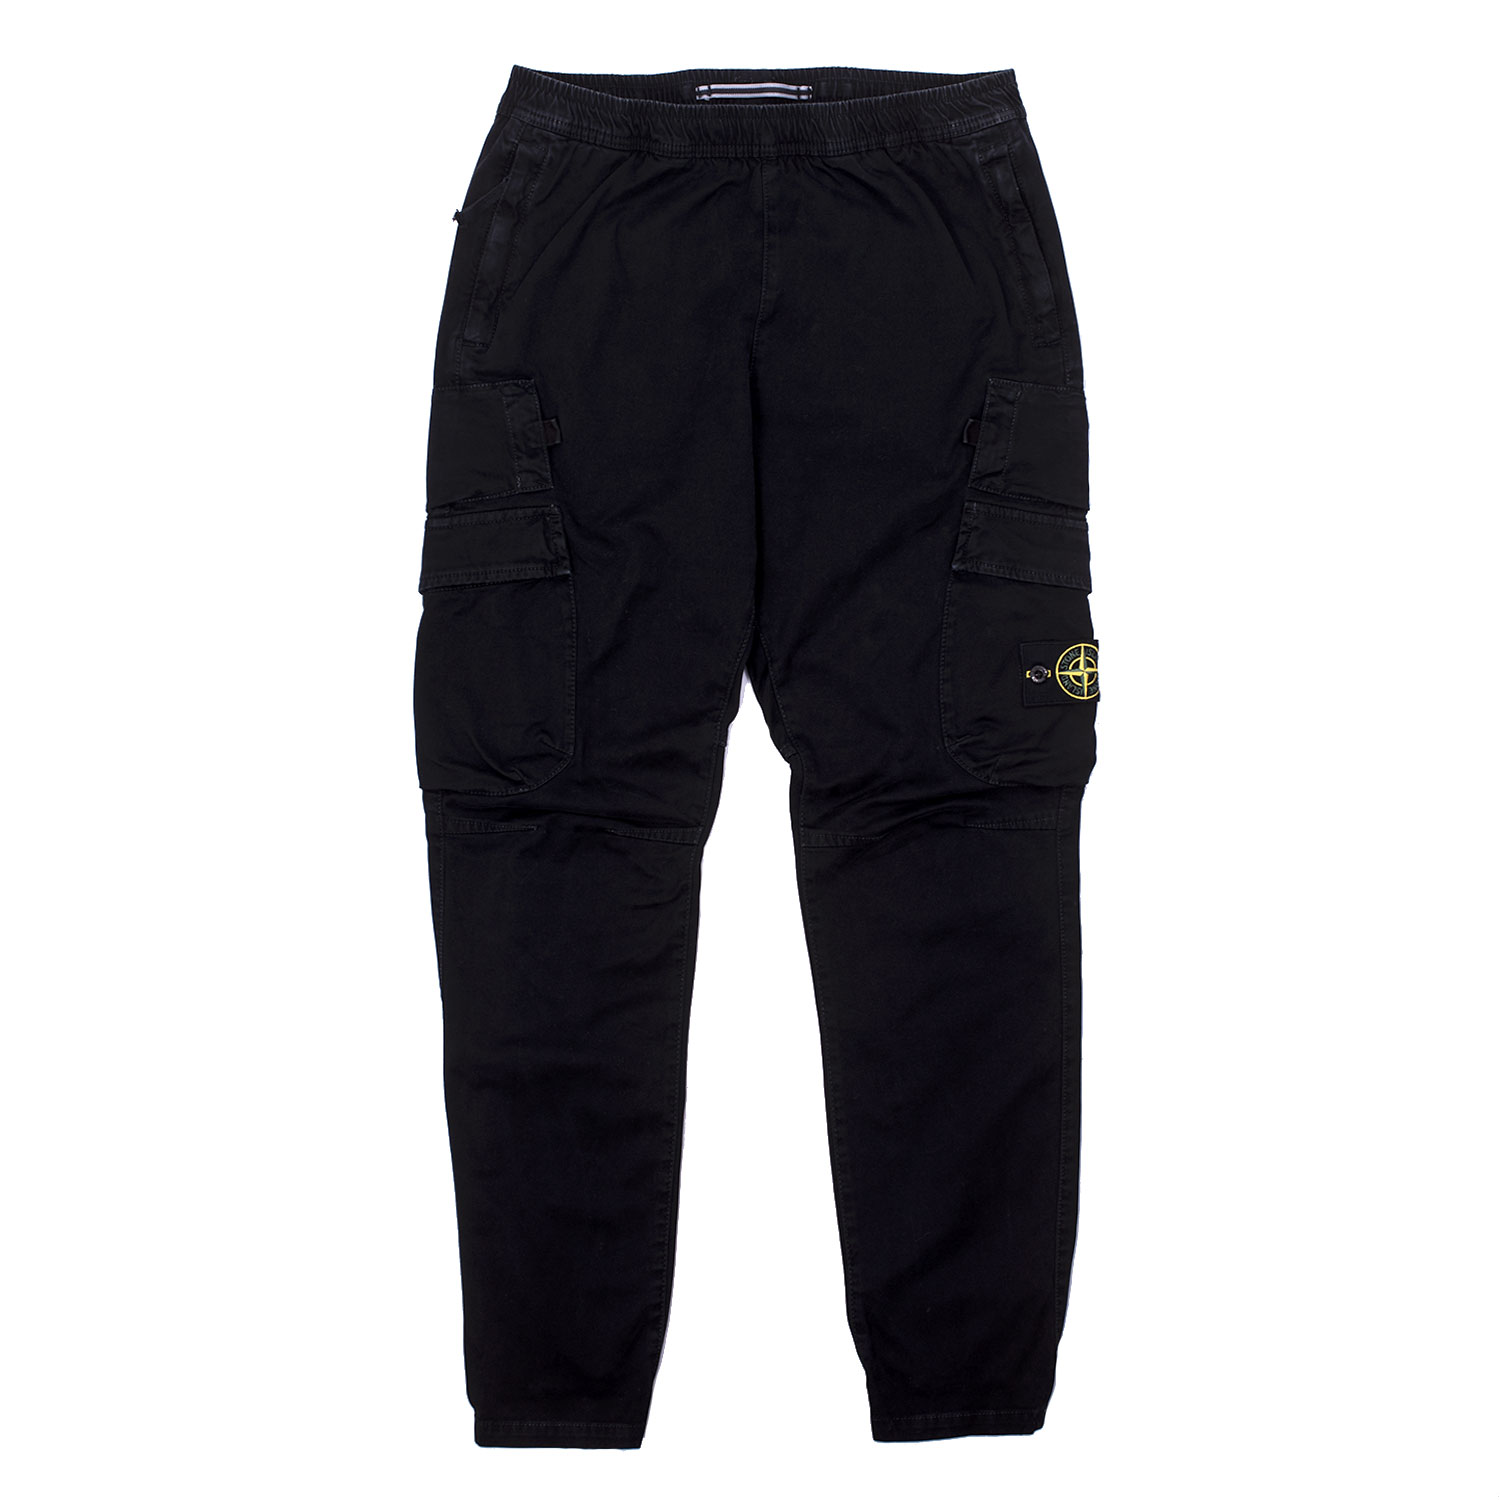 Stone Island Nylon Cargo Pants Review  On Body How Does It Fit  YouTube